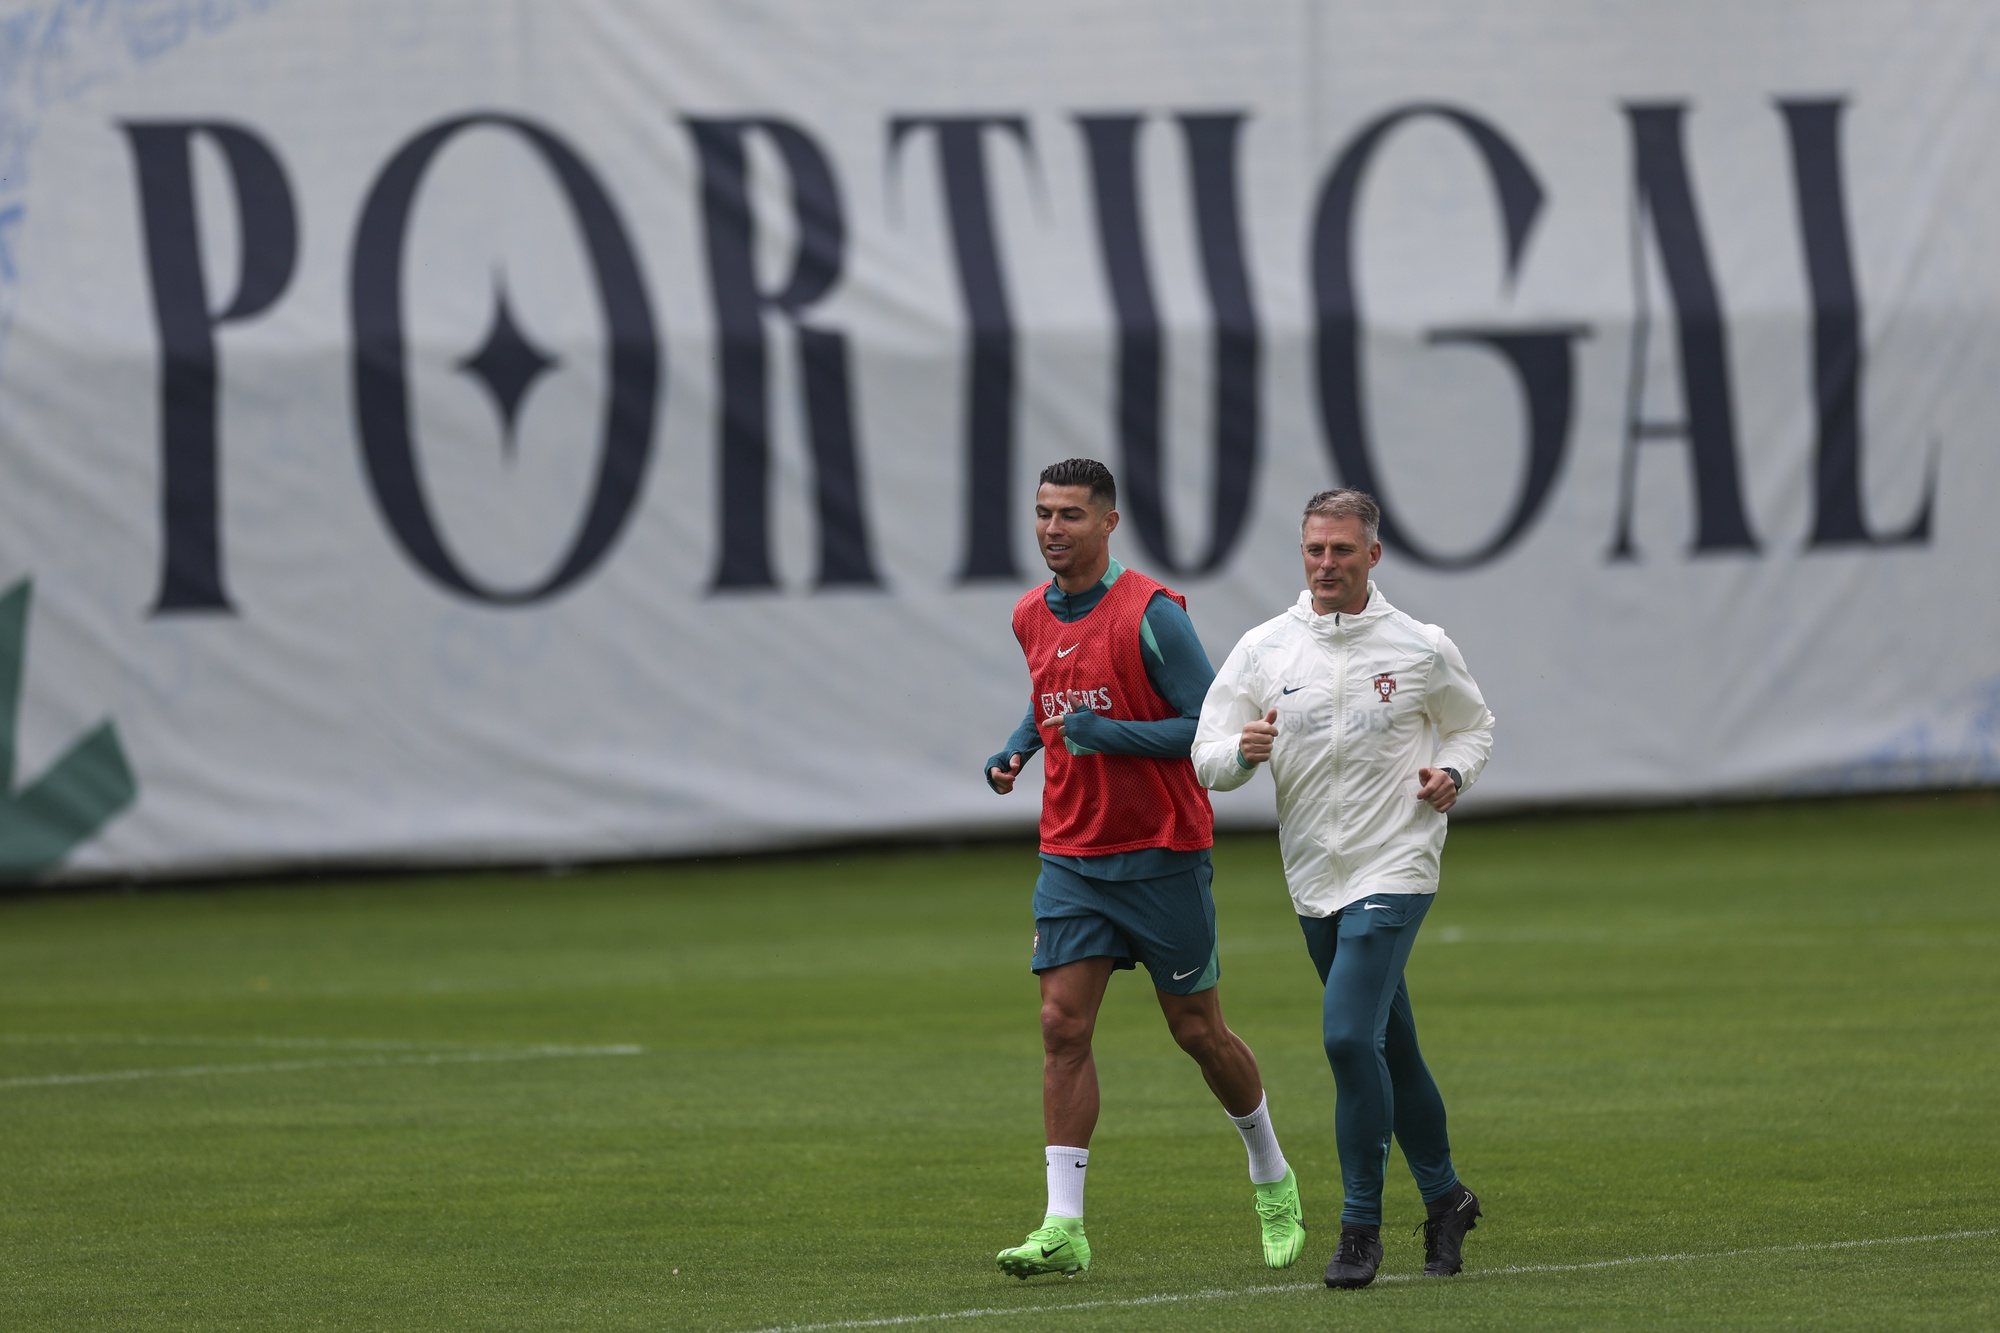 Portugal national soccer team player Cristiano Ronaldo during a training session in Marienfeld, Harsewinkel, Germany, 15 June 2024. The Portuguese national soccer team is based in Marienfeld, Harsewinkel during the UEFA EURO 2024. MIGUEL A. LOPES/LUSA